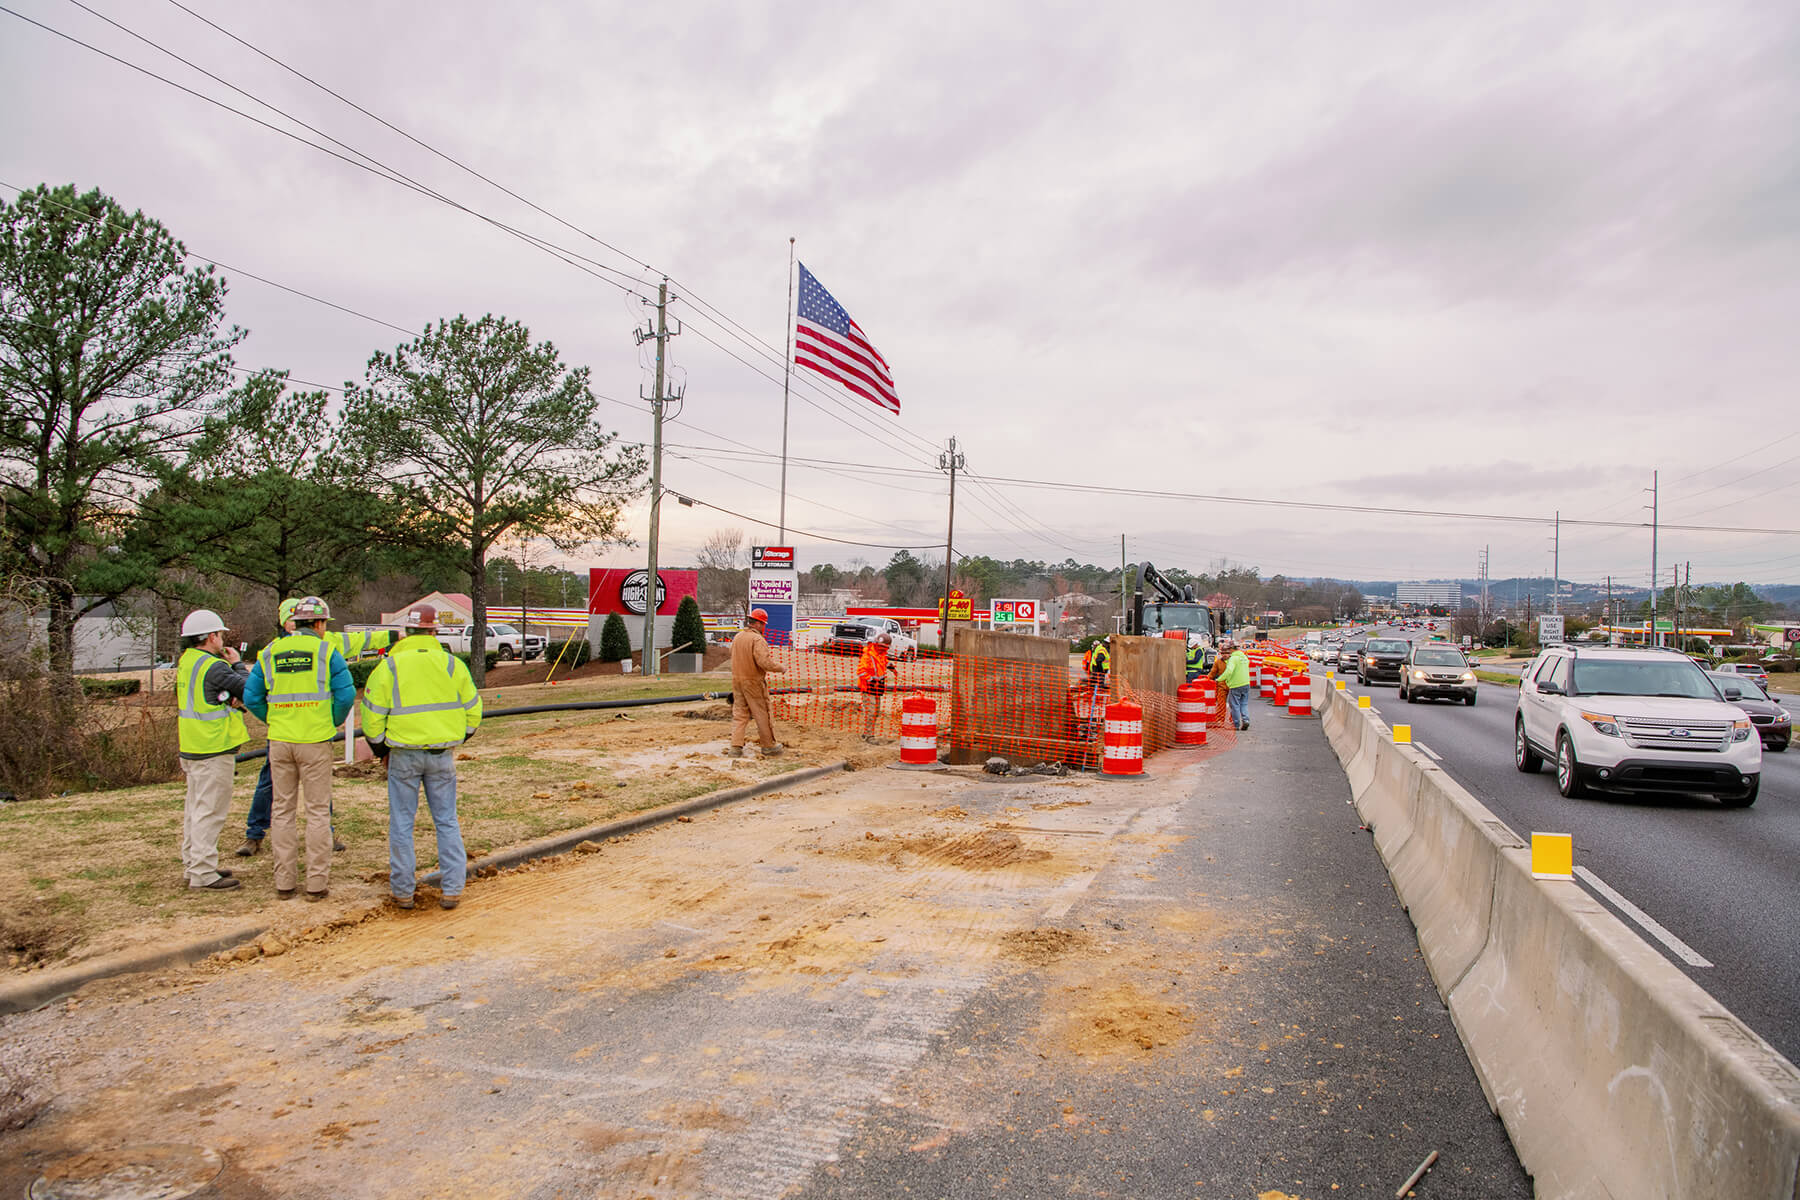 Section of U.S. Highway 280 under repair with U.S. flag in background.